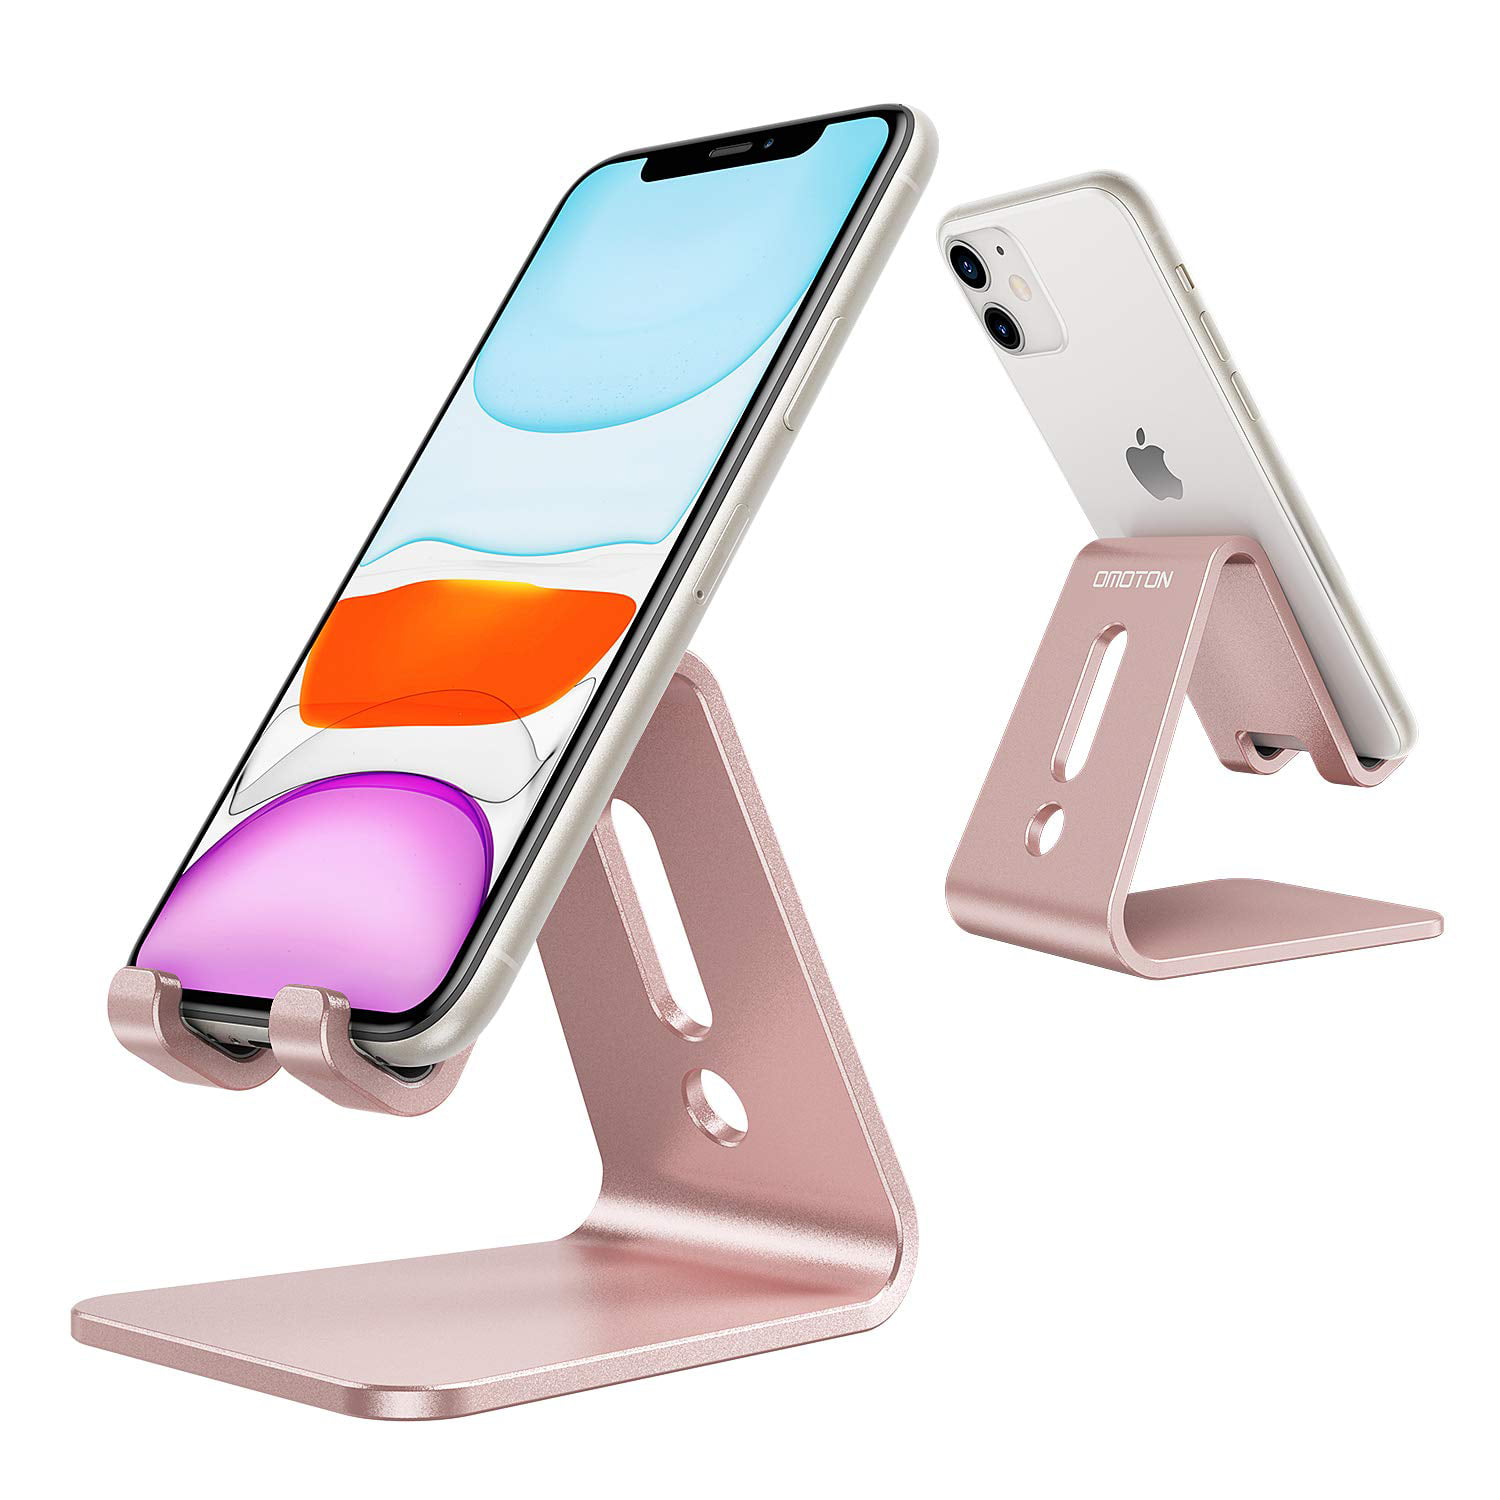 OMOTON 2 Pack Cell Phone Stand Desktop Cellphone Stand Tablet Rose Gold & Silver 